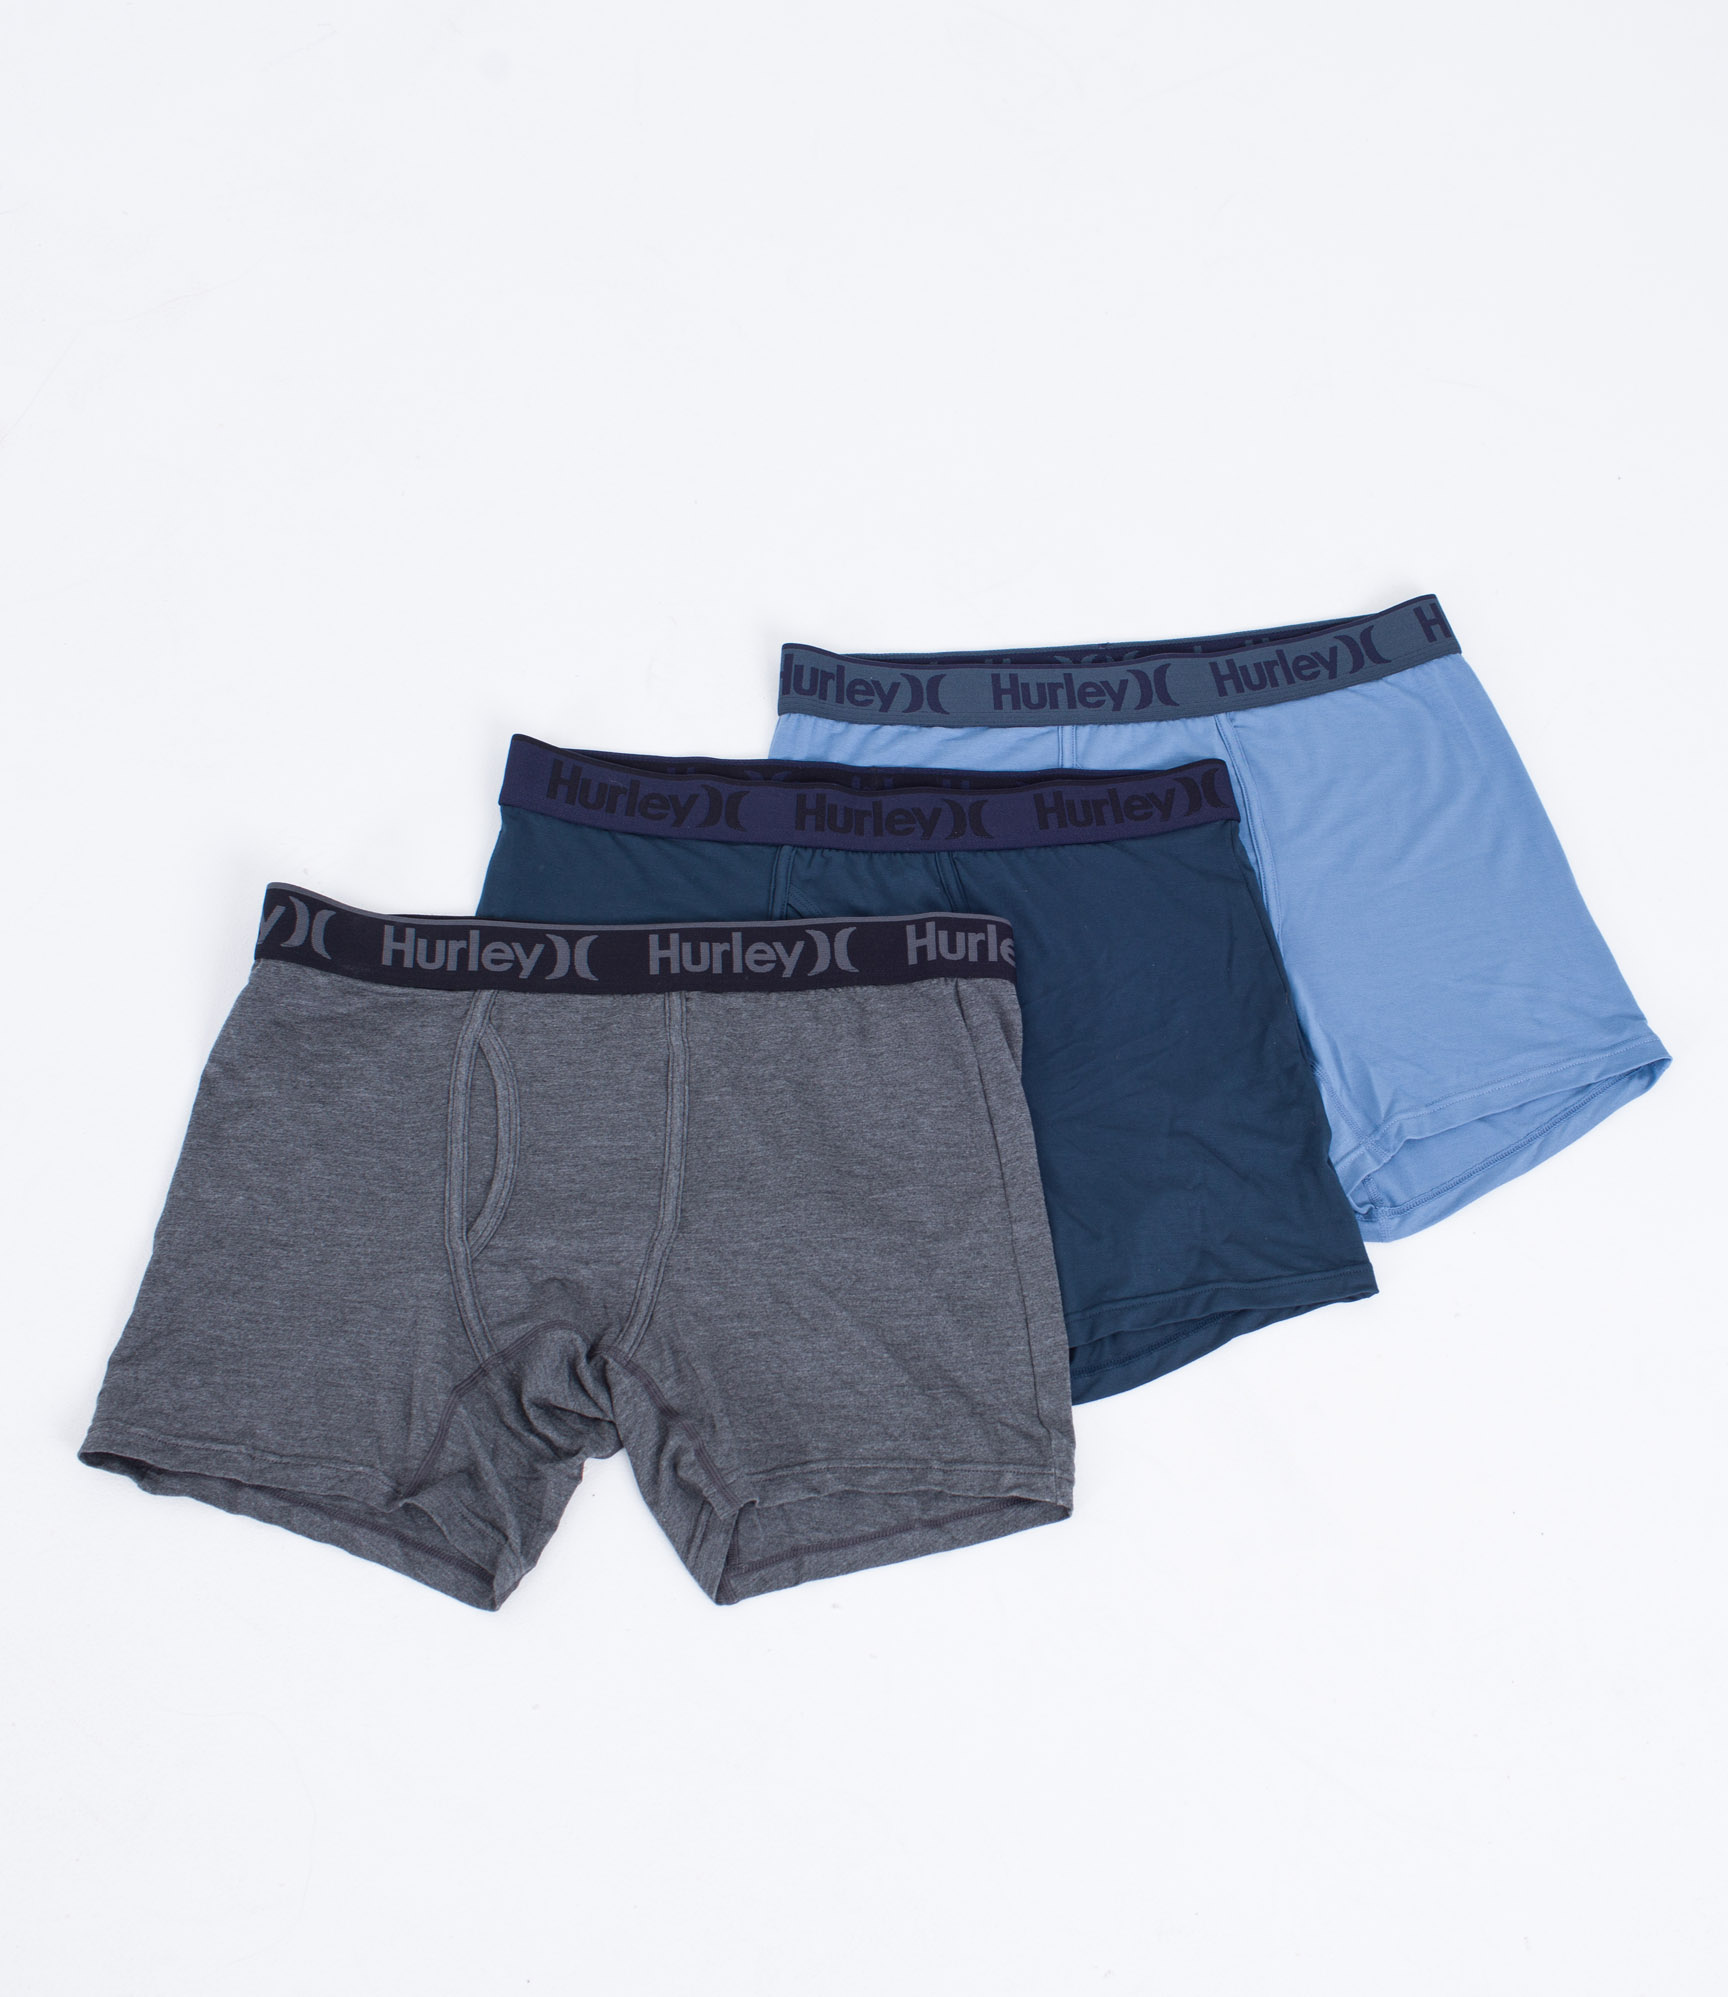 Hurley 2 Pack Of Grey & Blue Boxer Brief Shorts Men's Size Large NEW -  beyond exchange